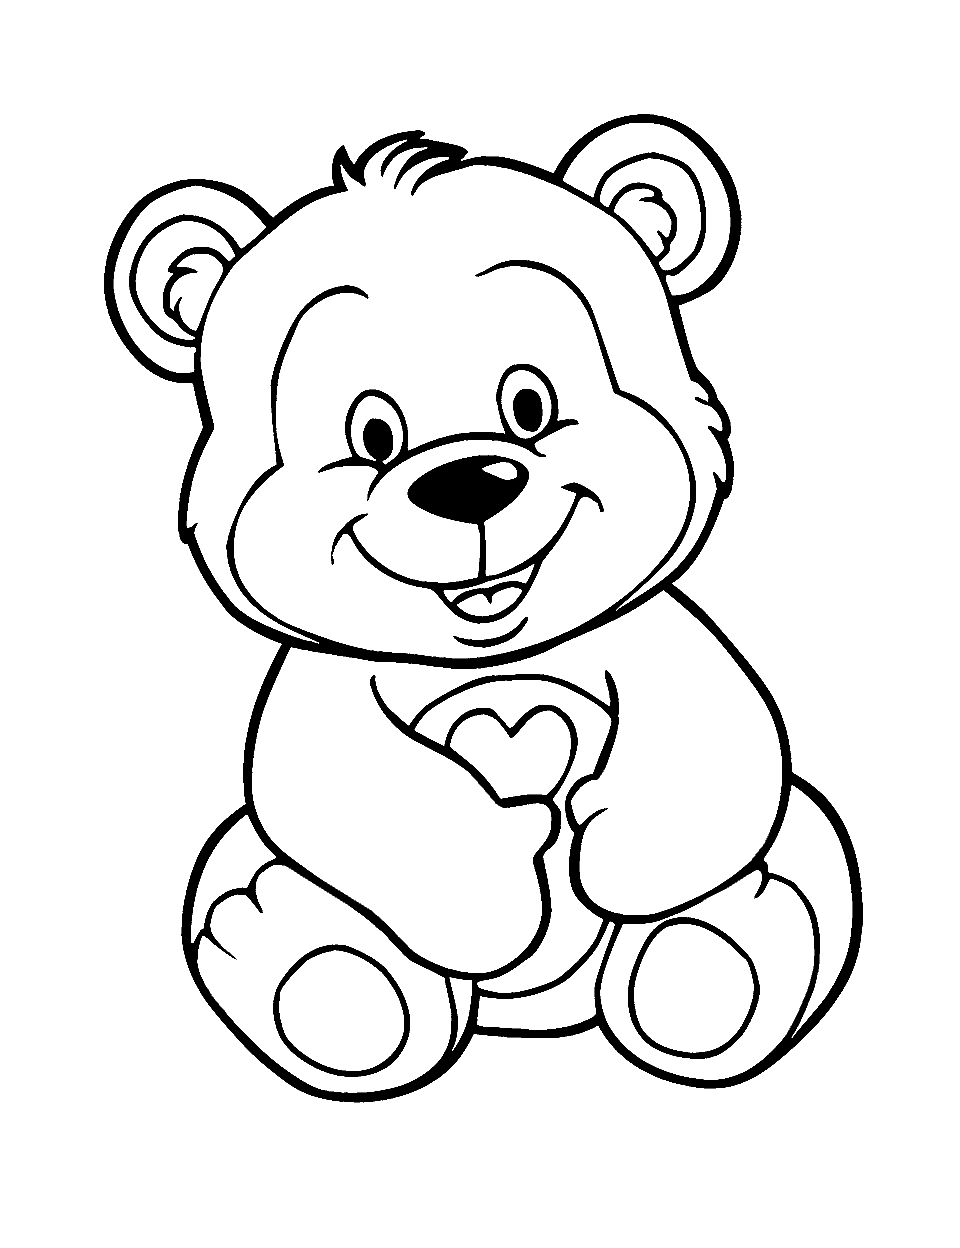 How To Draw A Teddy Bear: A Step-by-Step Guide | by Easy Draw For Kids |  Medium